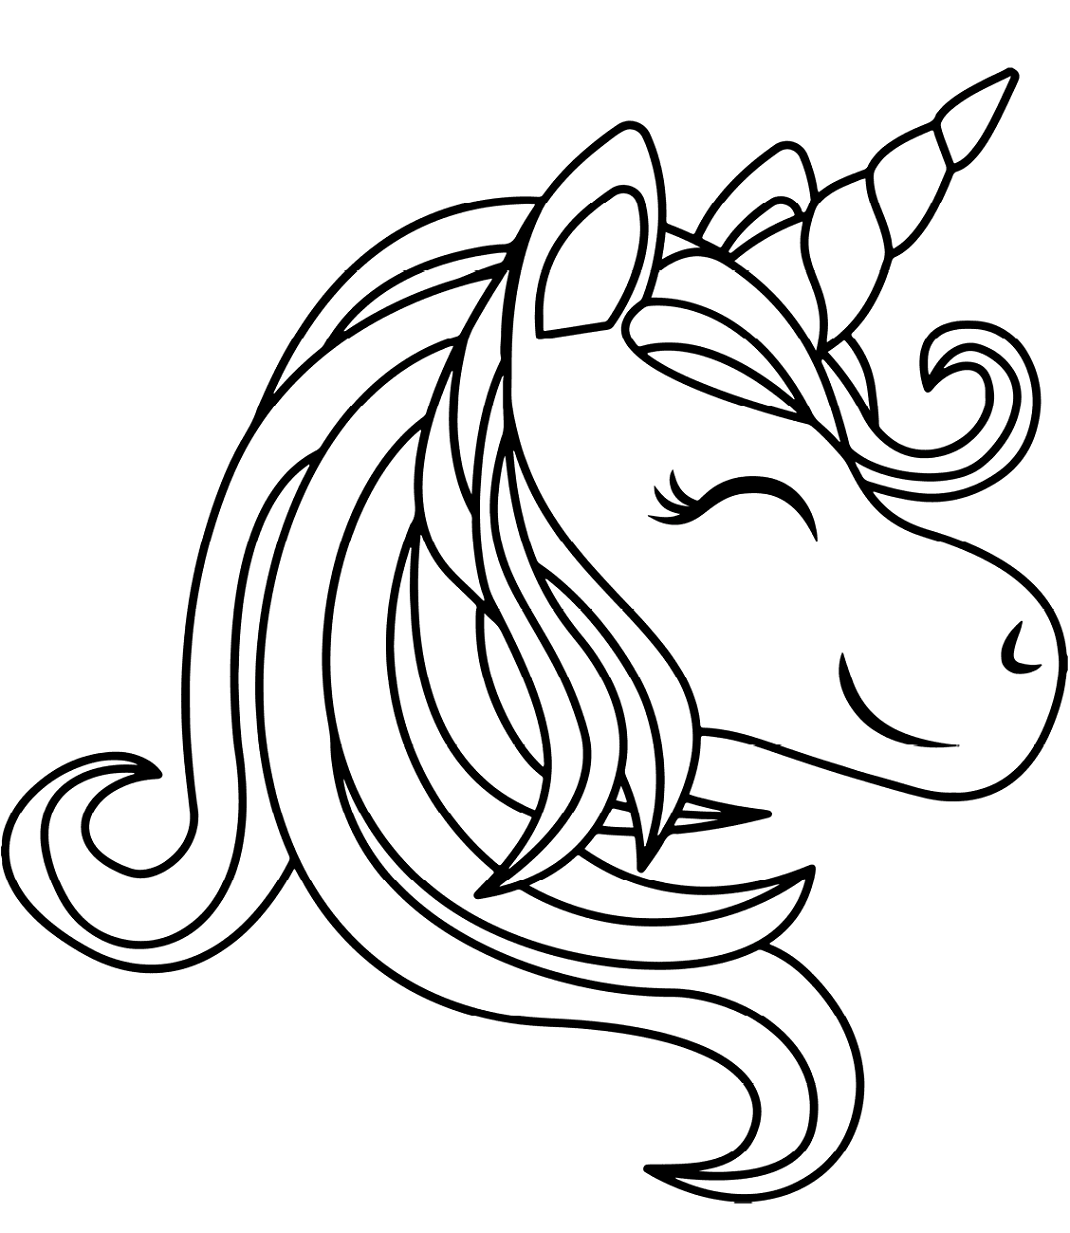 unicorn-head-smiling-coloring-page-free-printable-coloring-pages-for-kids